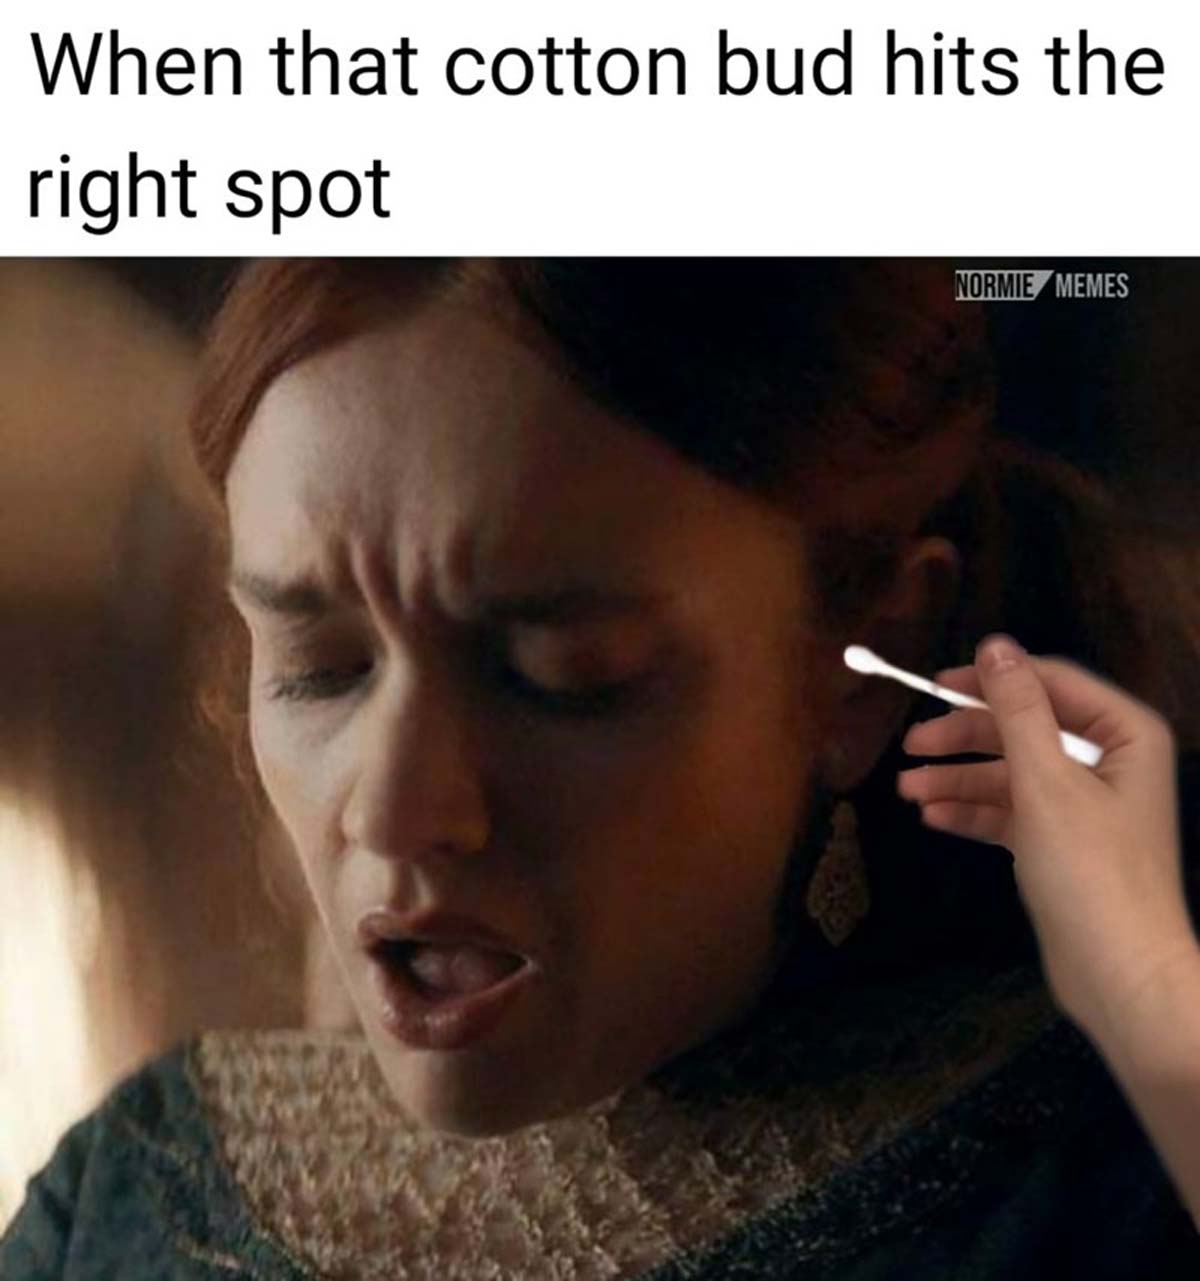 Meme - When that cotton bud hits the right spot Normie Memes